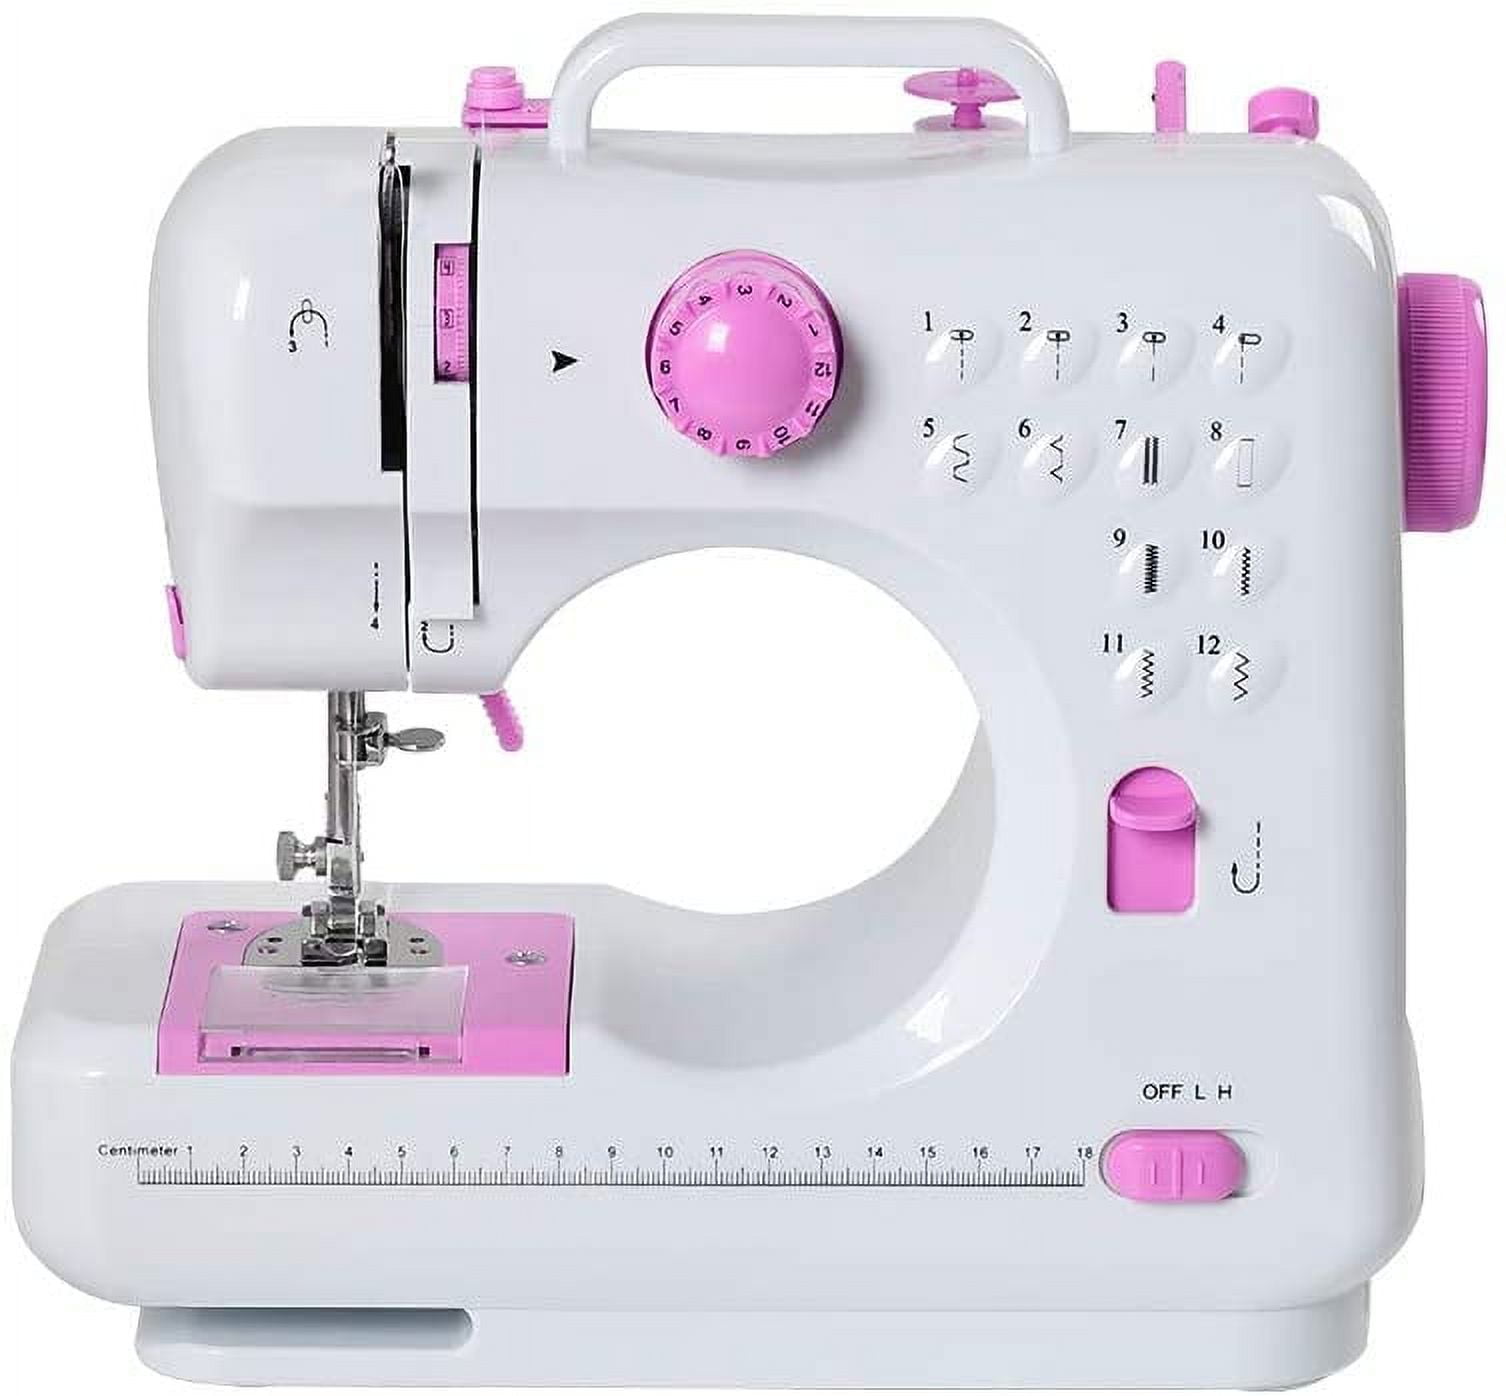 Viferr Electric Sewing Machine Crafting Speed Crafting Mending Machine Portable Mini with 12 Built-In Stitches, 2 Speeds Double Thread, Embroidery